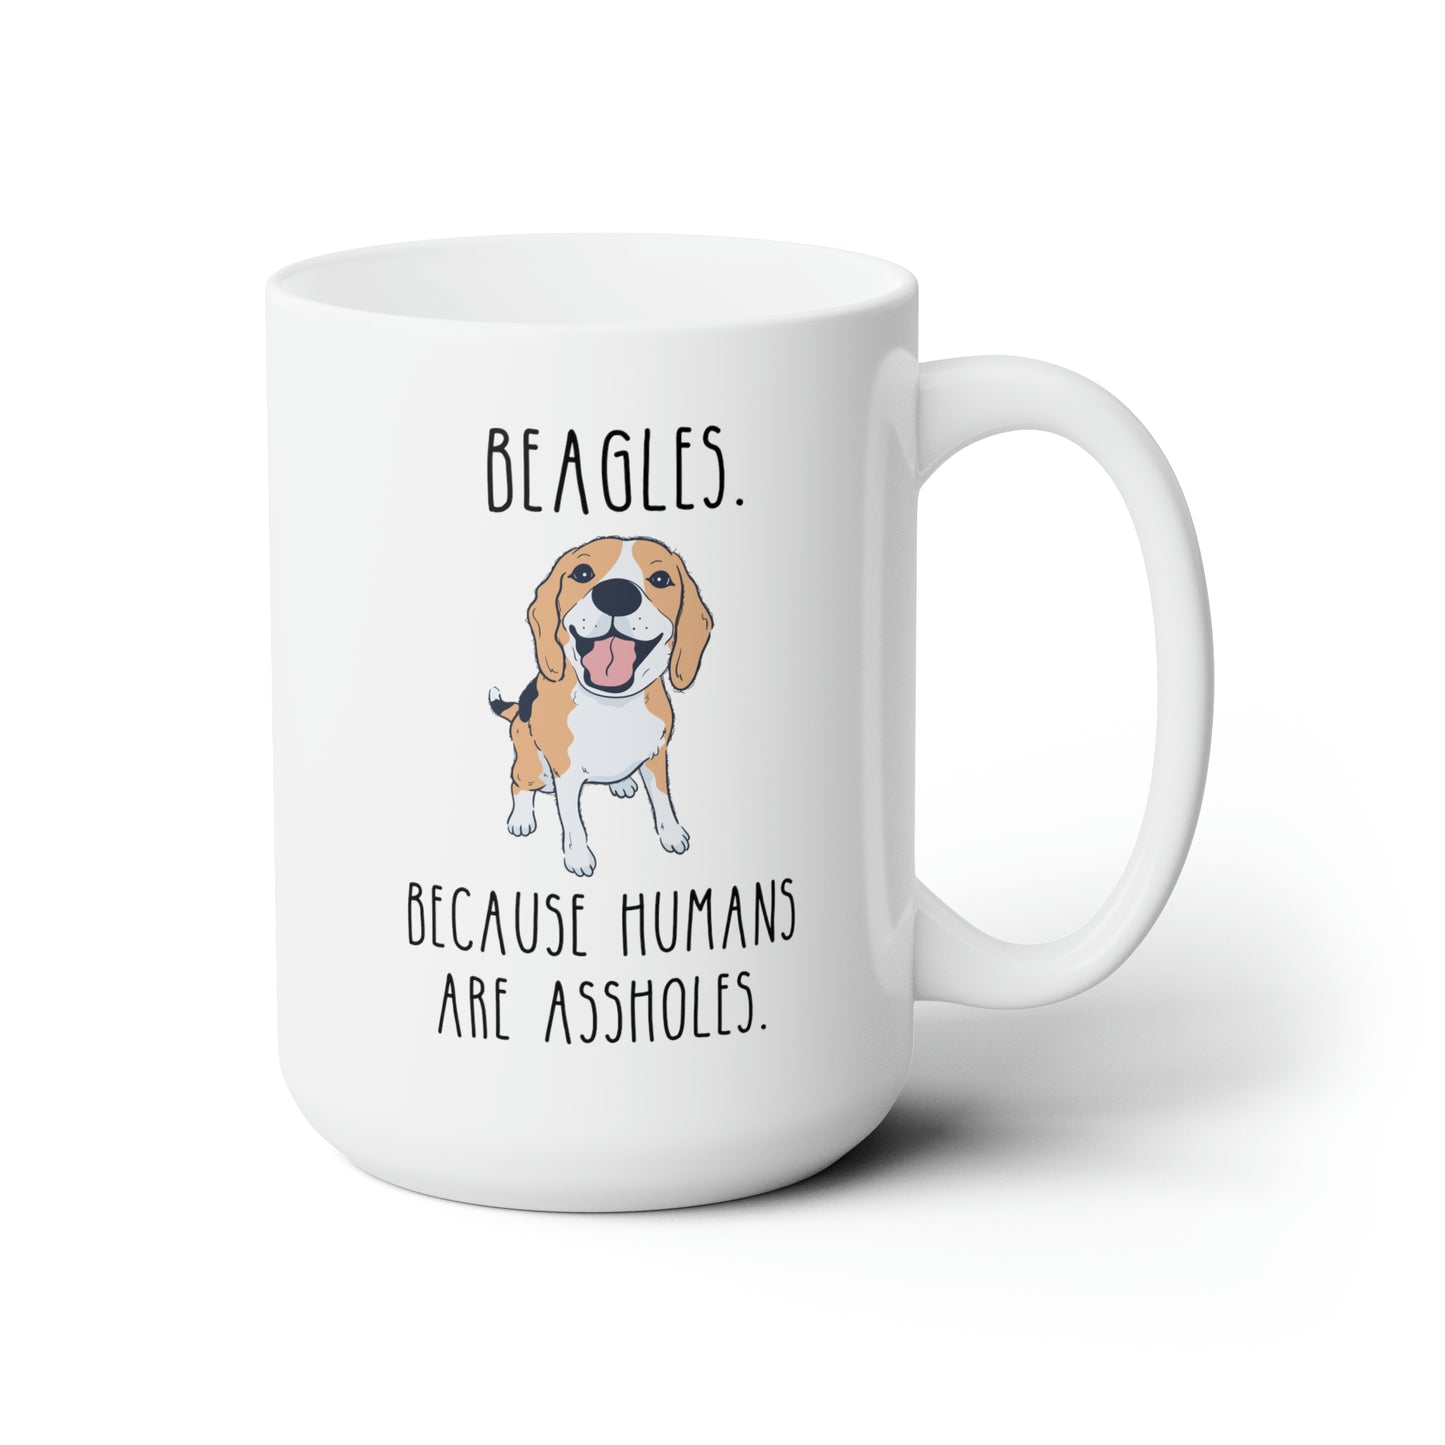 Beagles Because Humans Are Assholes 15oz white funny large coffee mug gift for dog lovers mom rude present sarcastic furparent waveywares wavey wares wavywares wavy wares